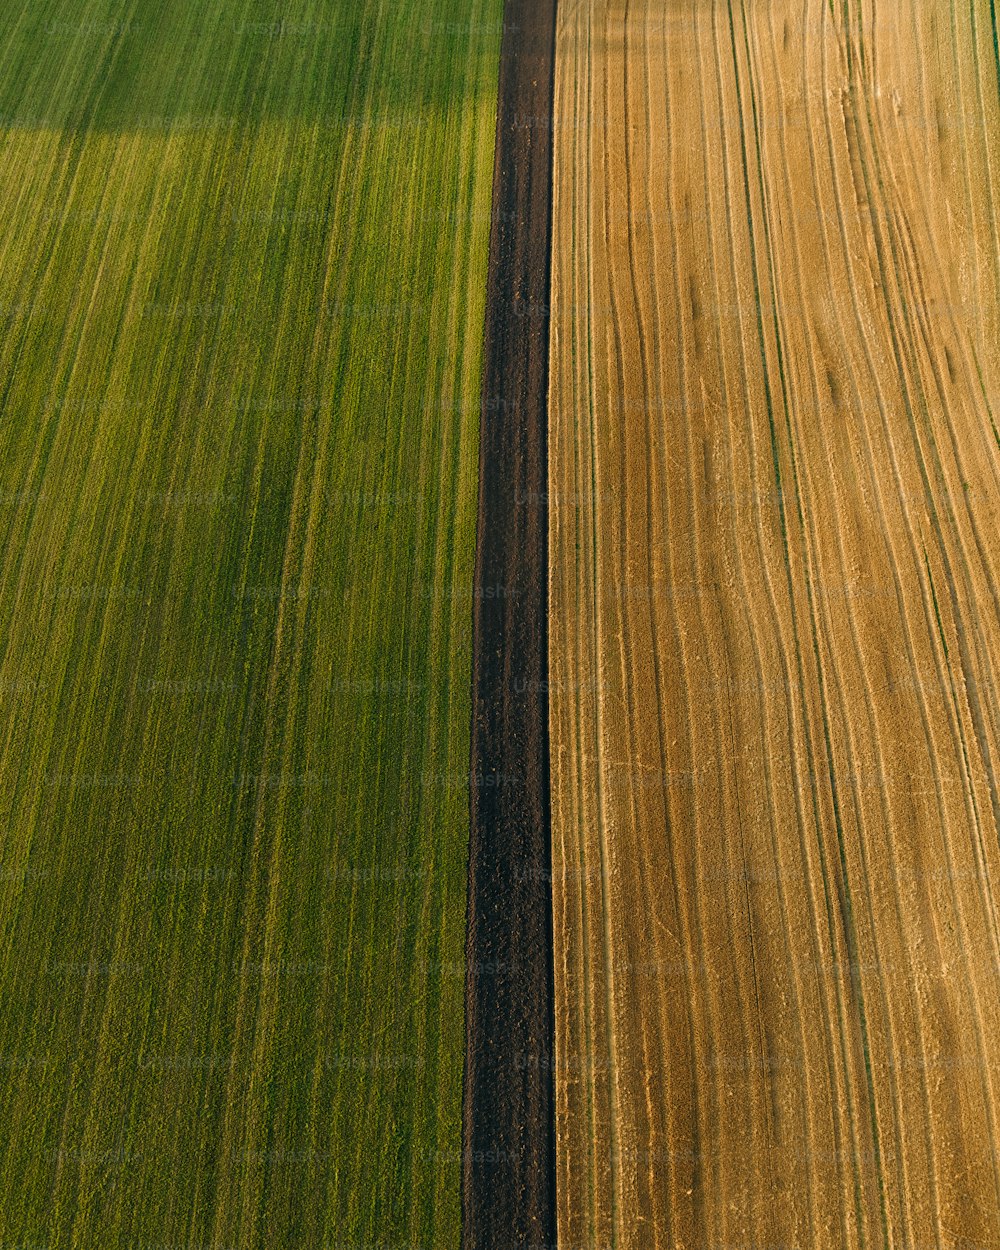 an aerial view of a farm field with two rows of green grass